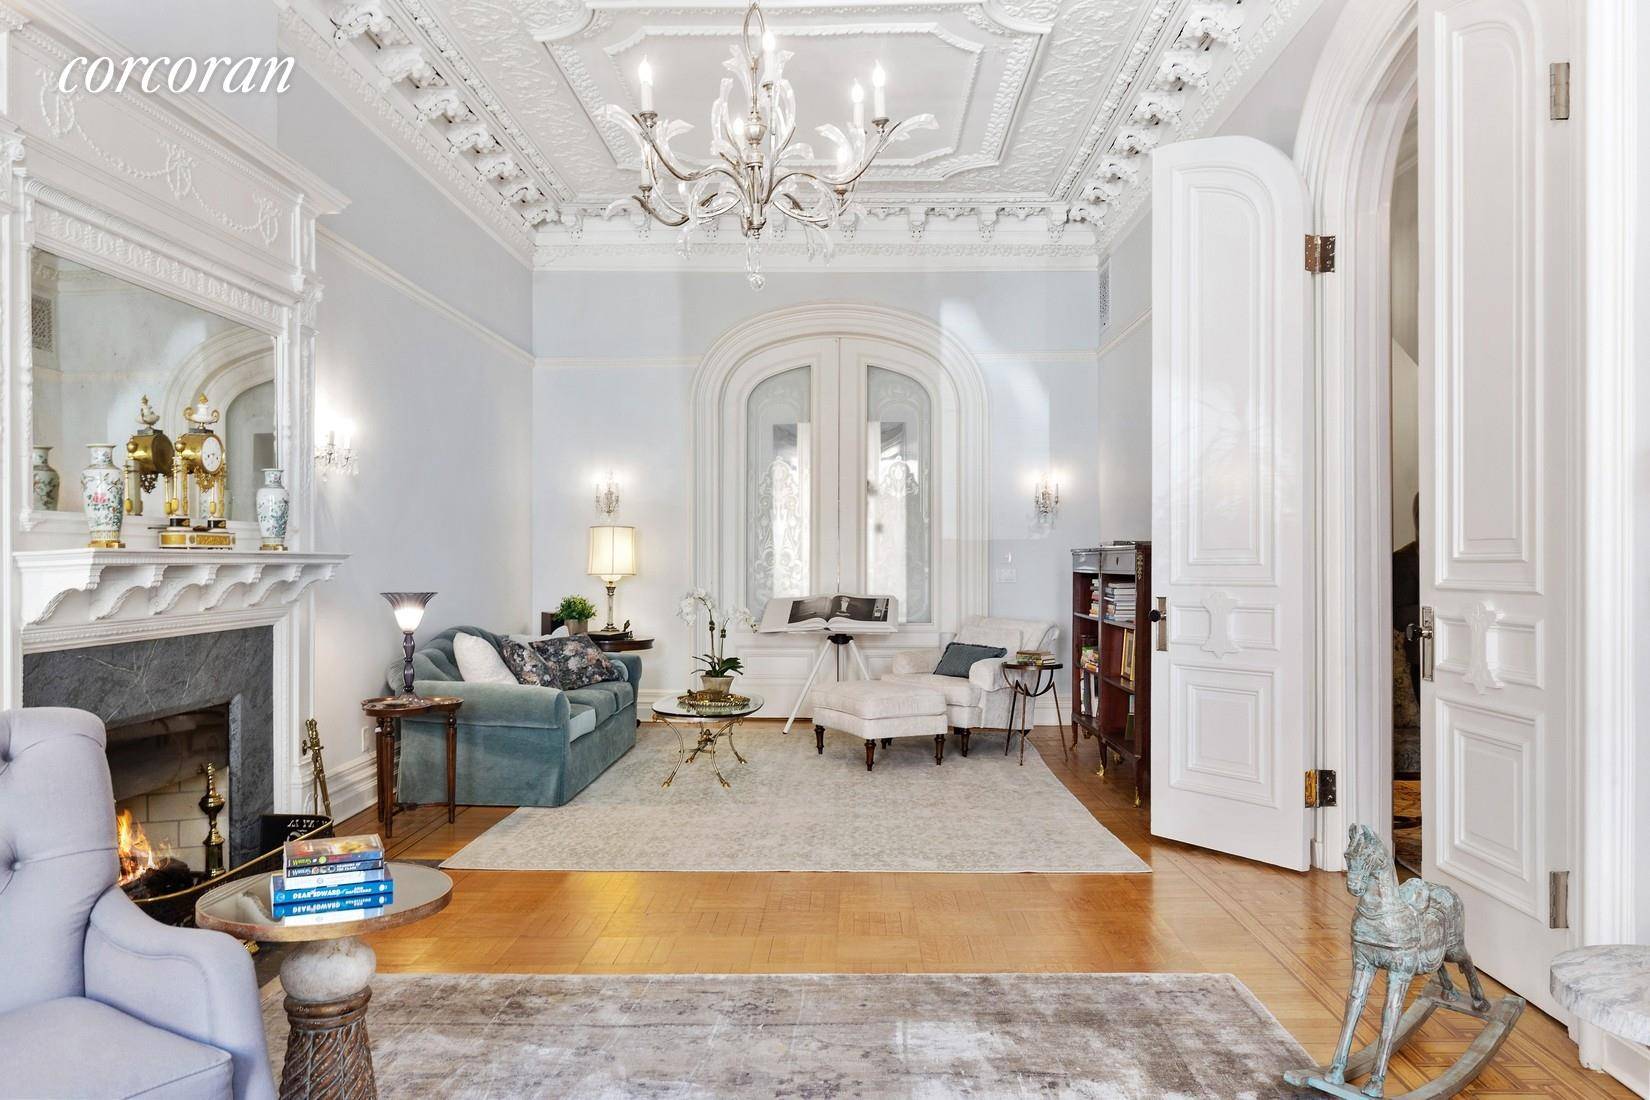 This Remsen Street brownstone rental has it All A.